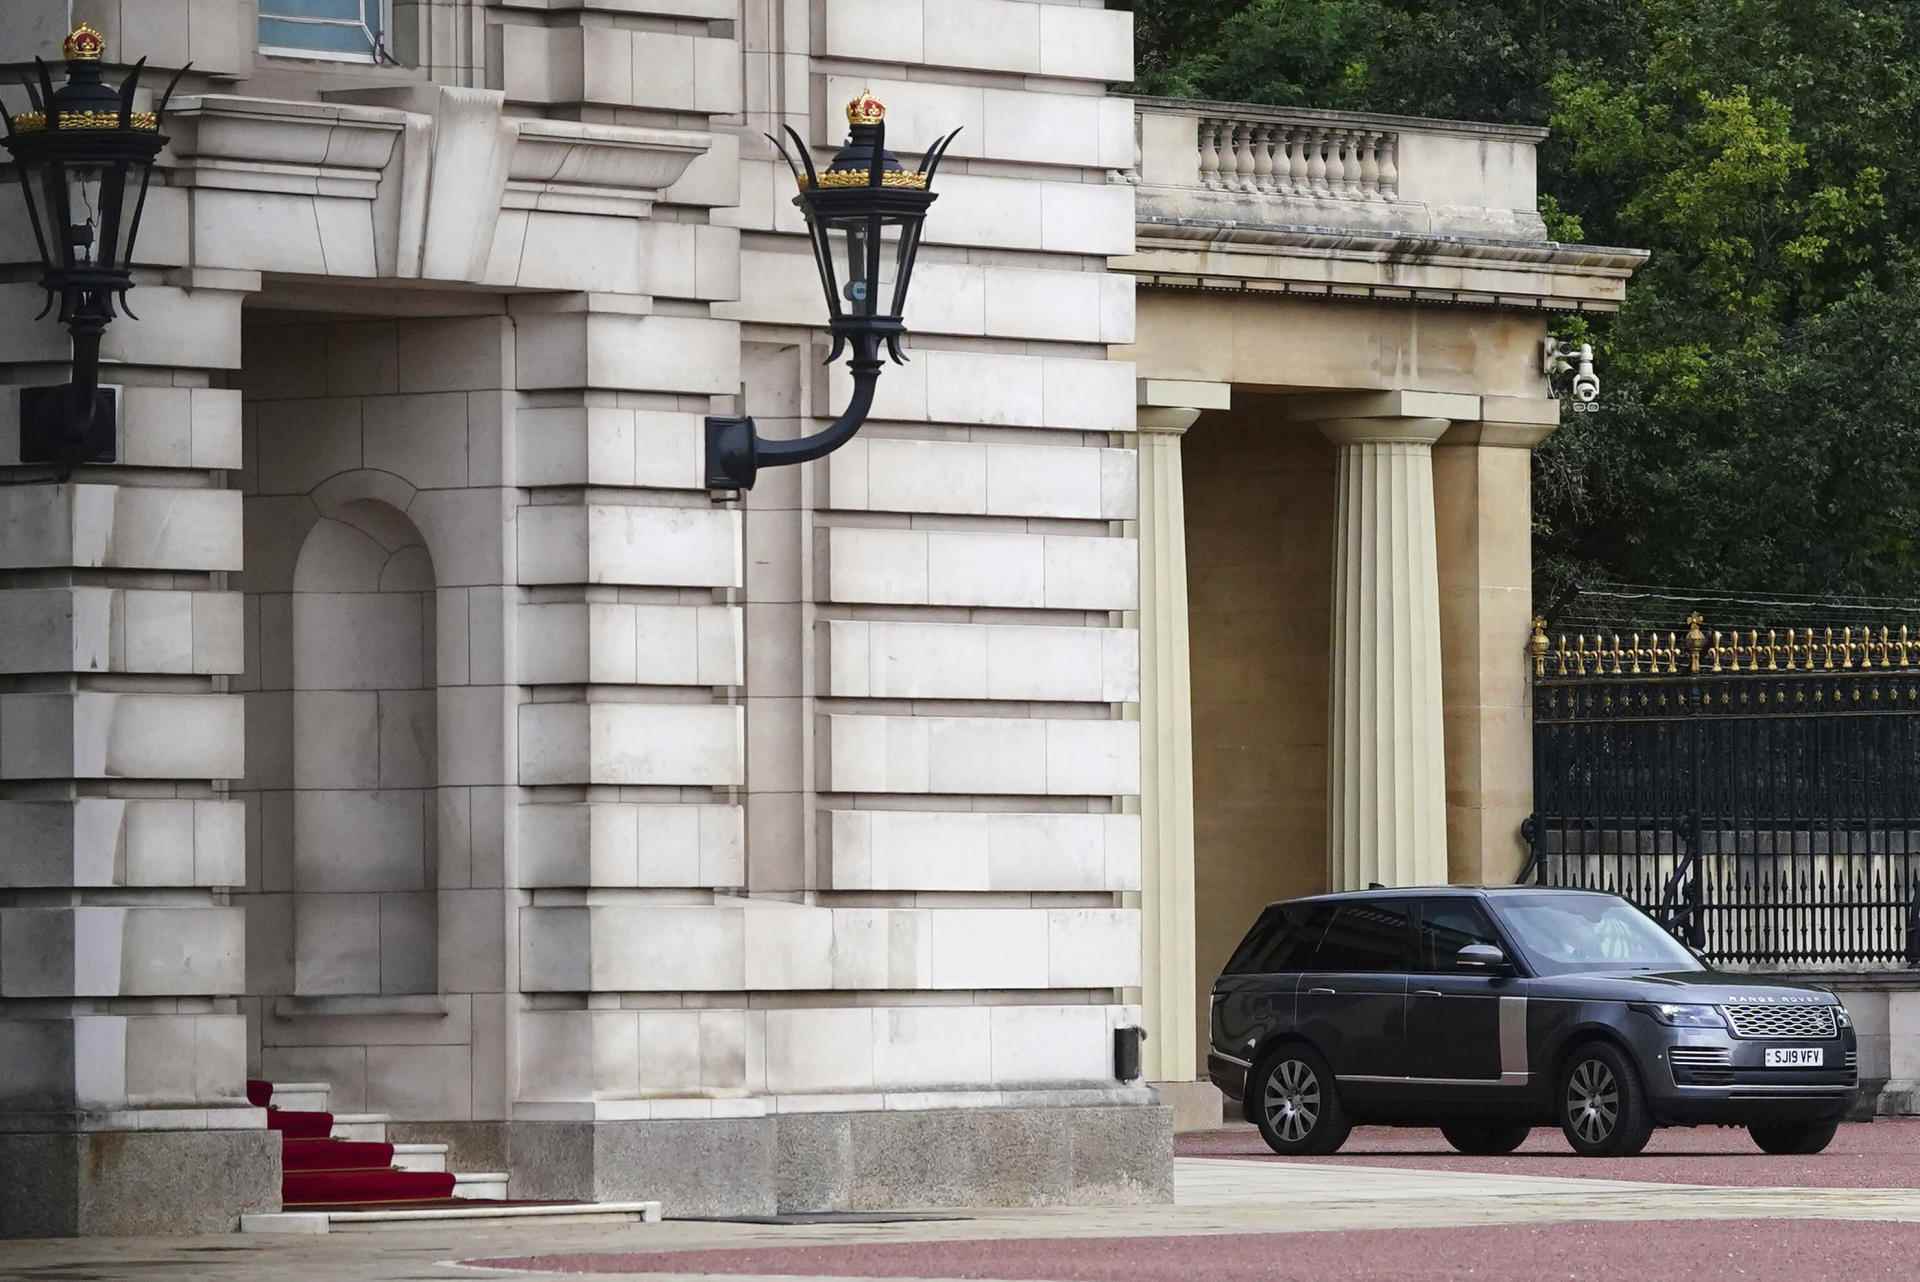 Liz Truss leaves Buckingham Palace after having an audience with King Charles III, September 9, 2022.